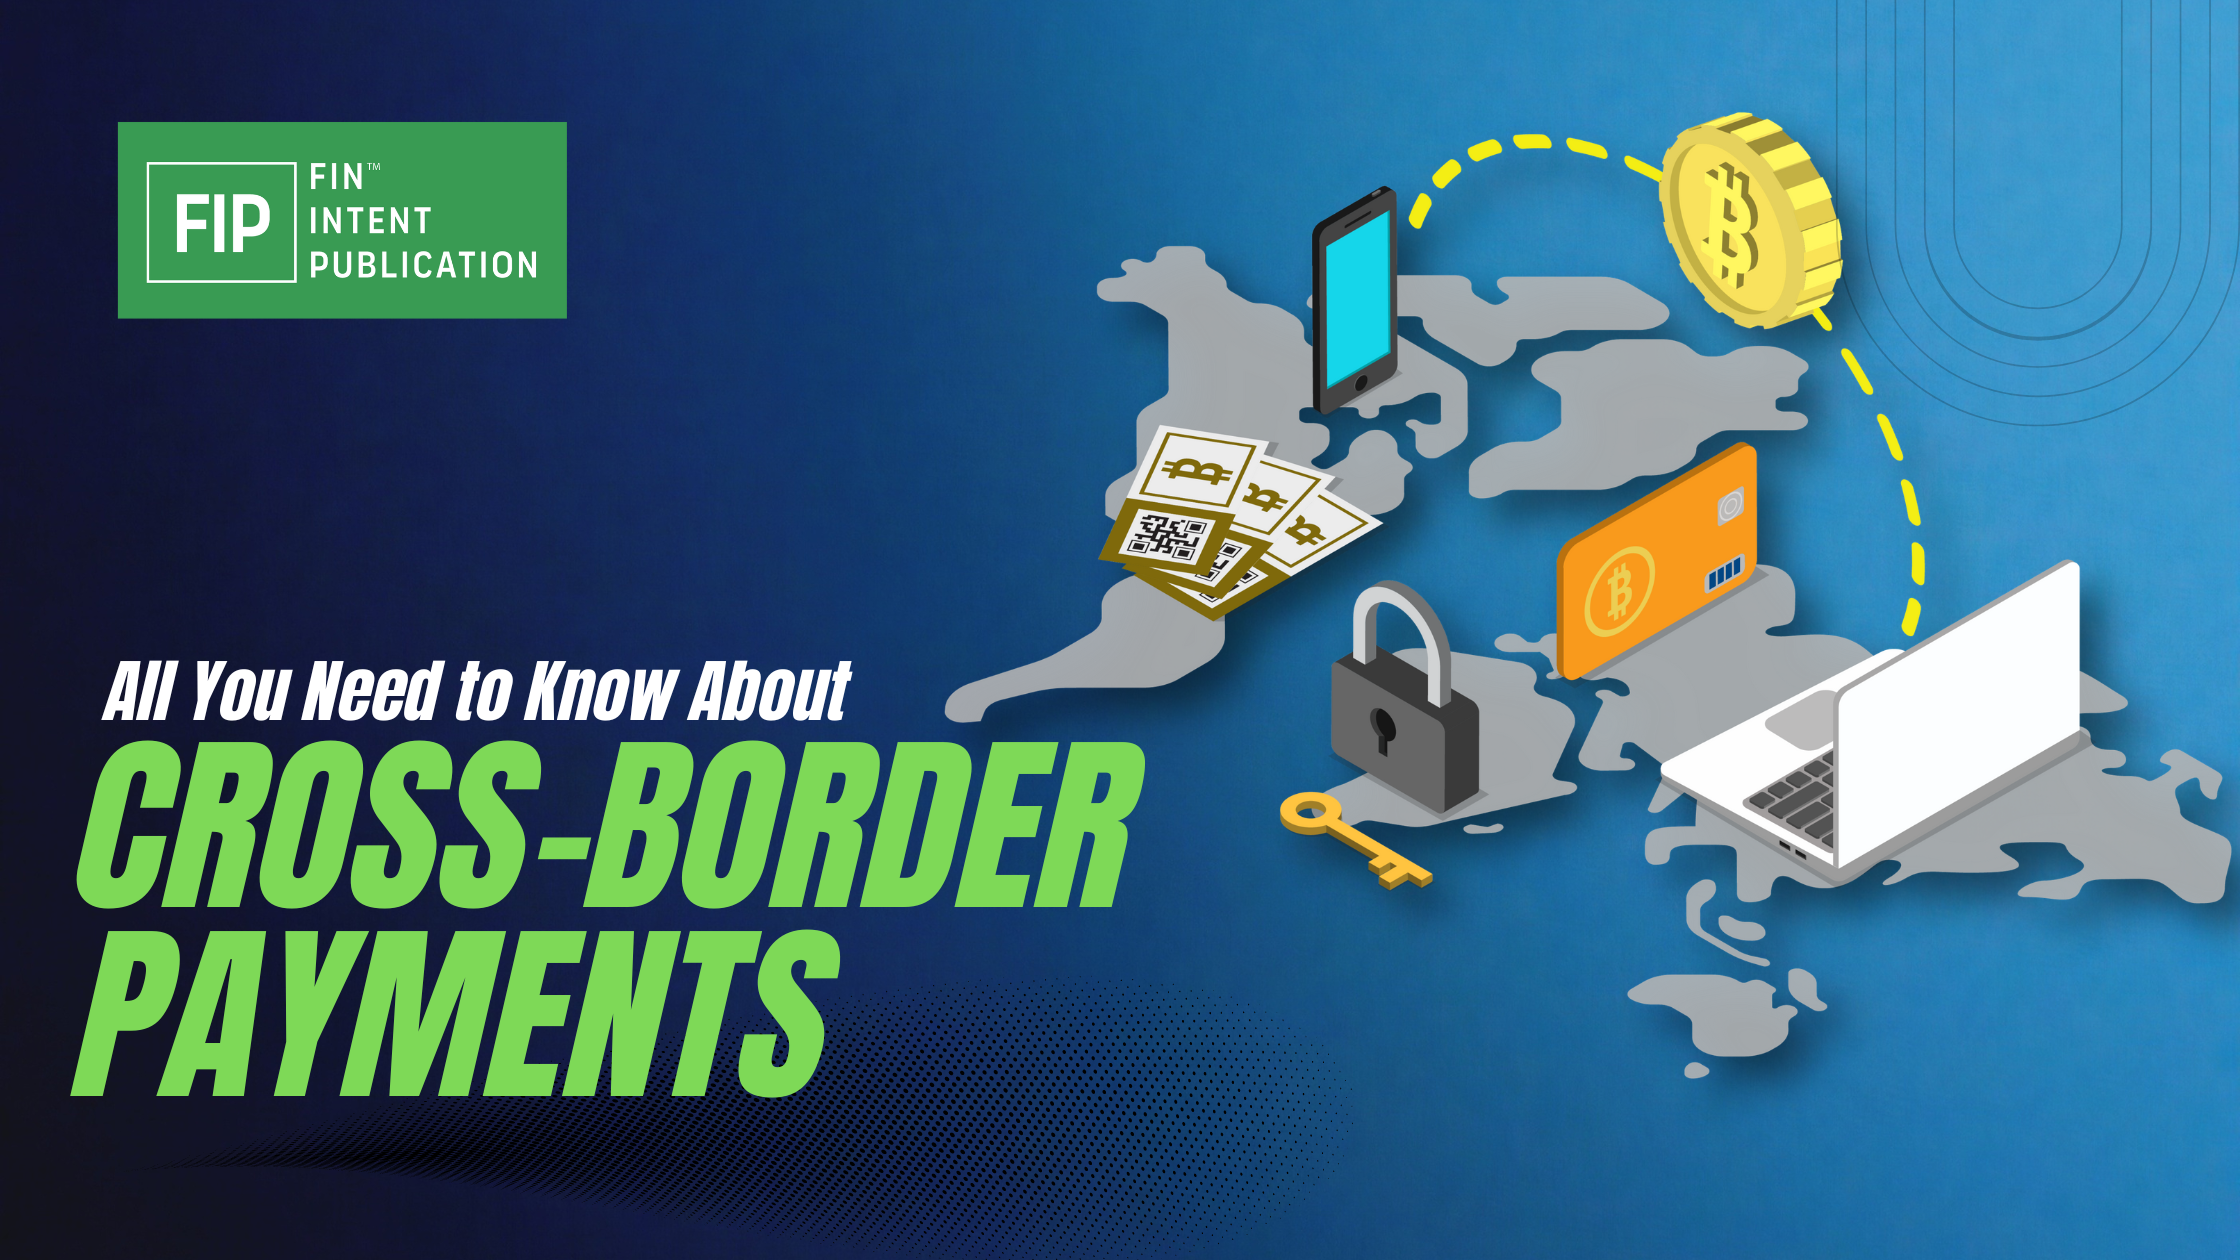 All You Need to Know About Cross-Border Payments